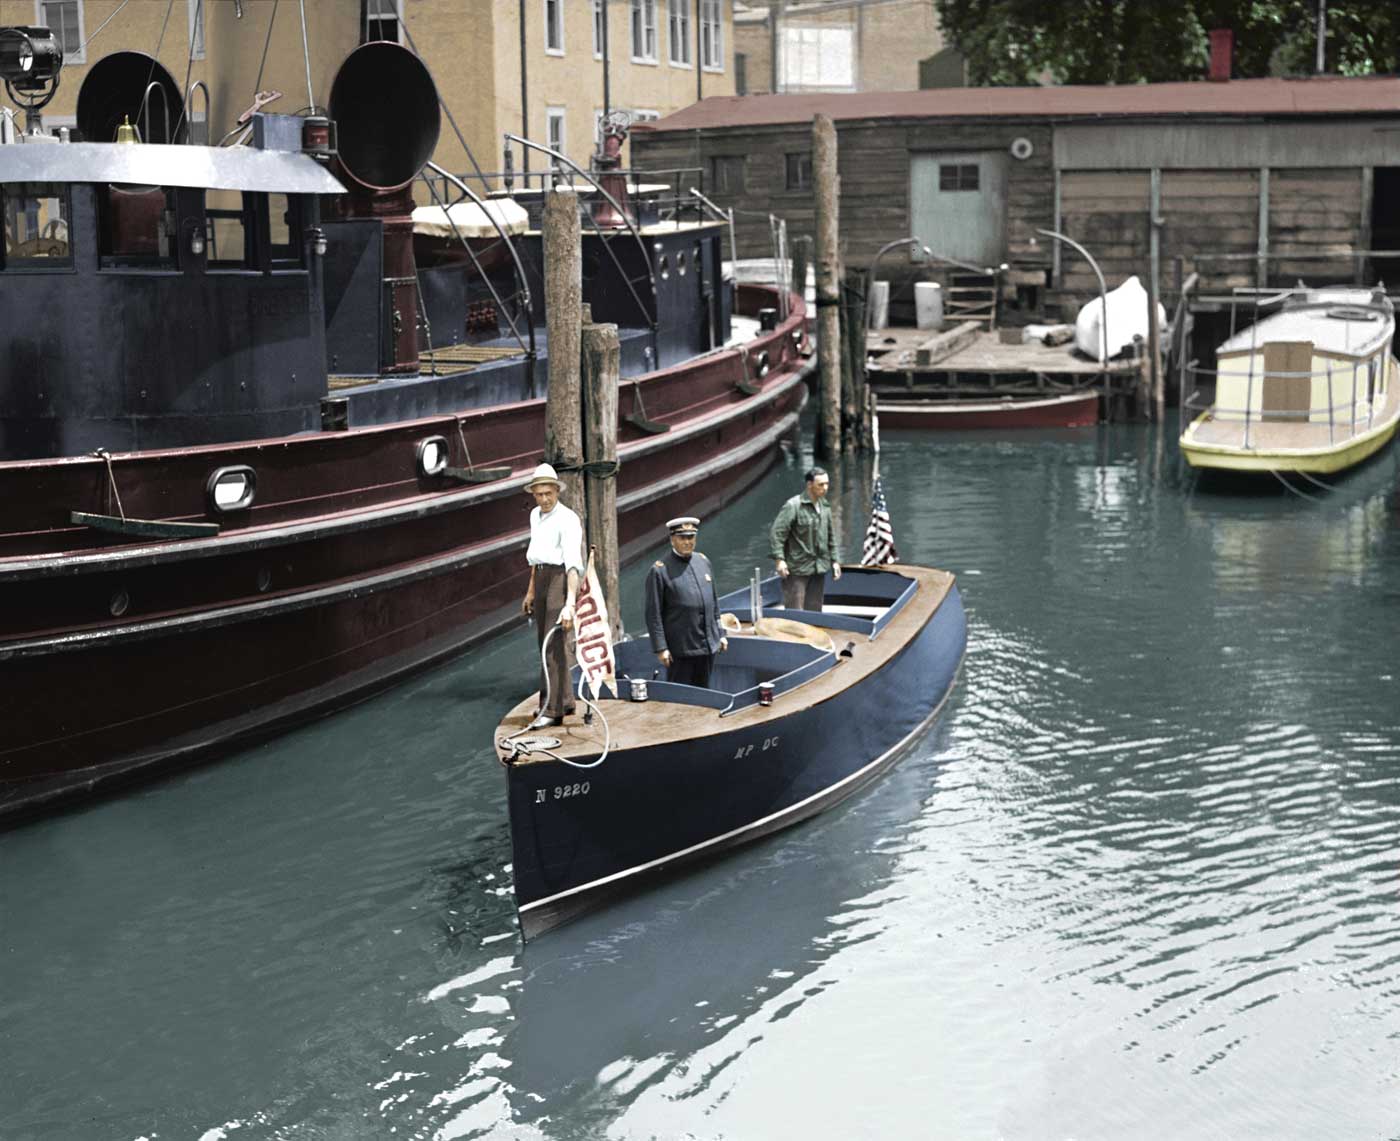 Harbor Police Boat, July 1926 (colorized). View full size.